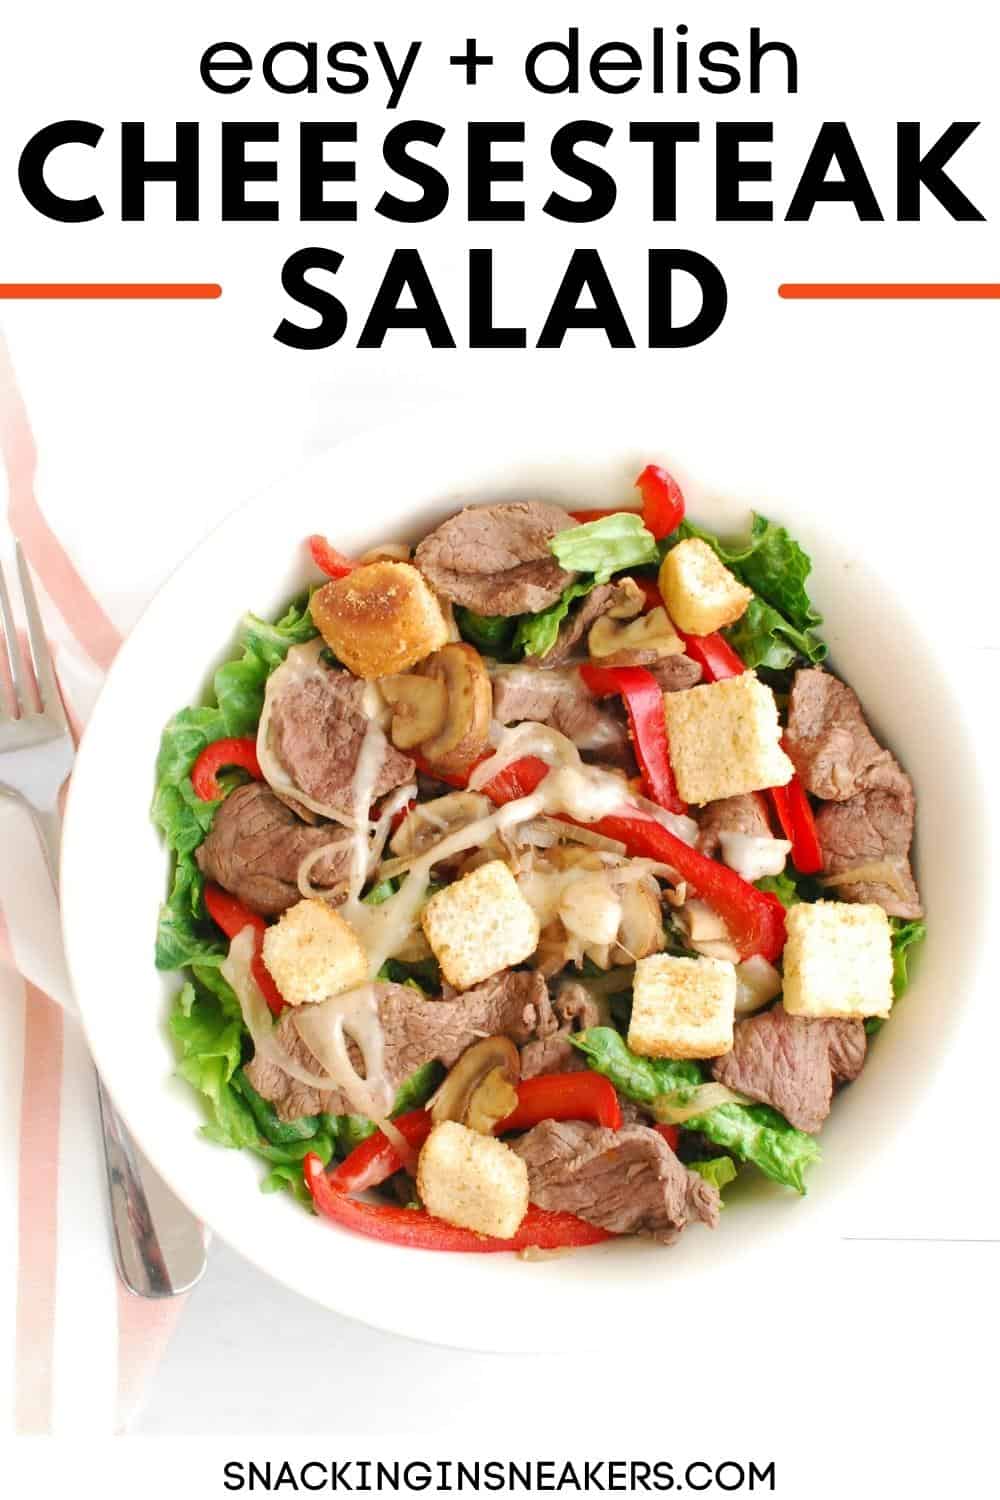 A bowl of cheesesteak salad with a text overlay for Pinterest.